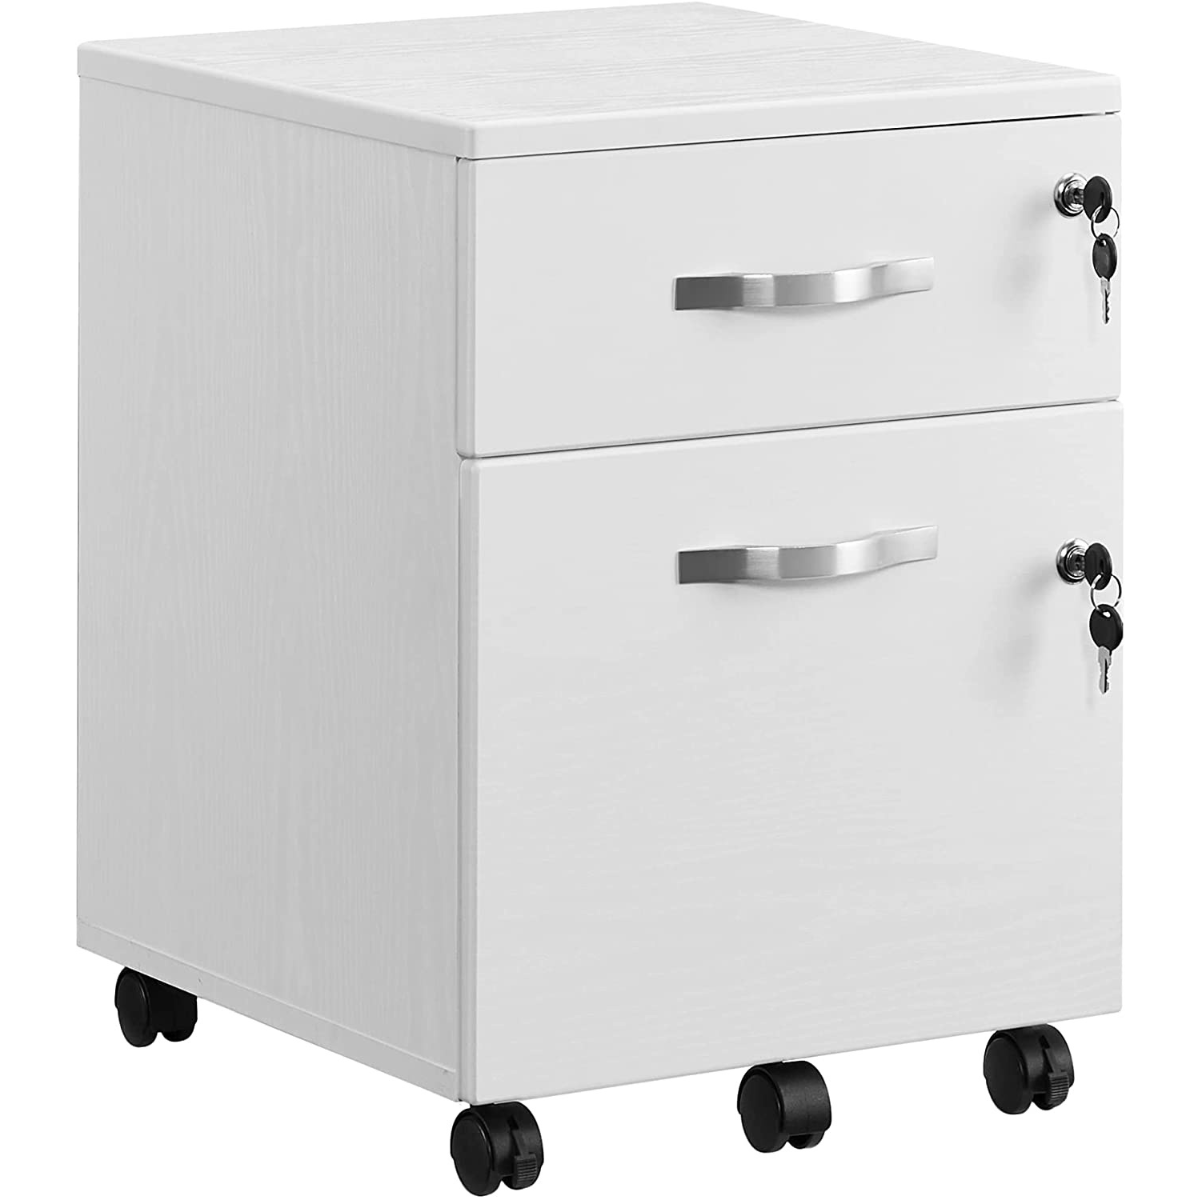 Nancy's Drawer Unit - Steel Locker on Wheels - Office Cabinet - Rolling Container - White